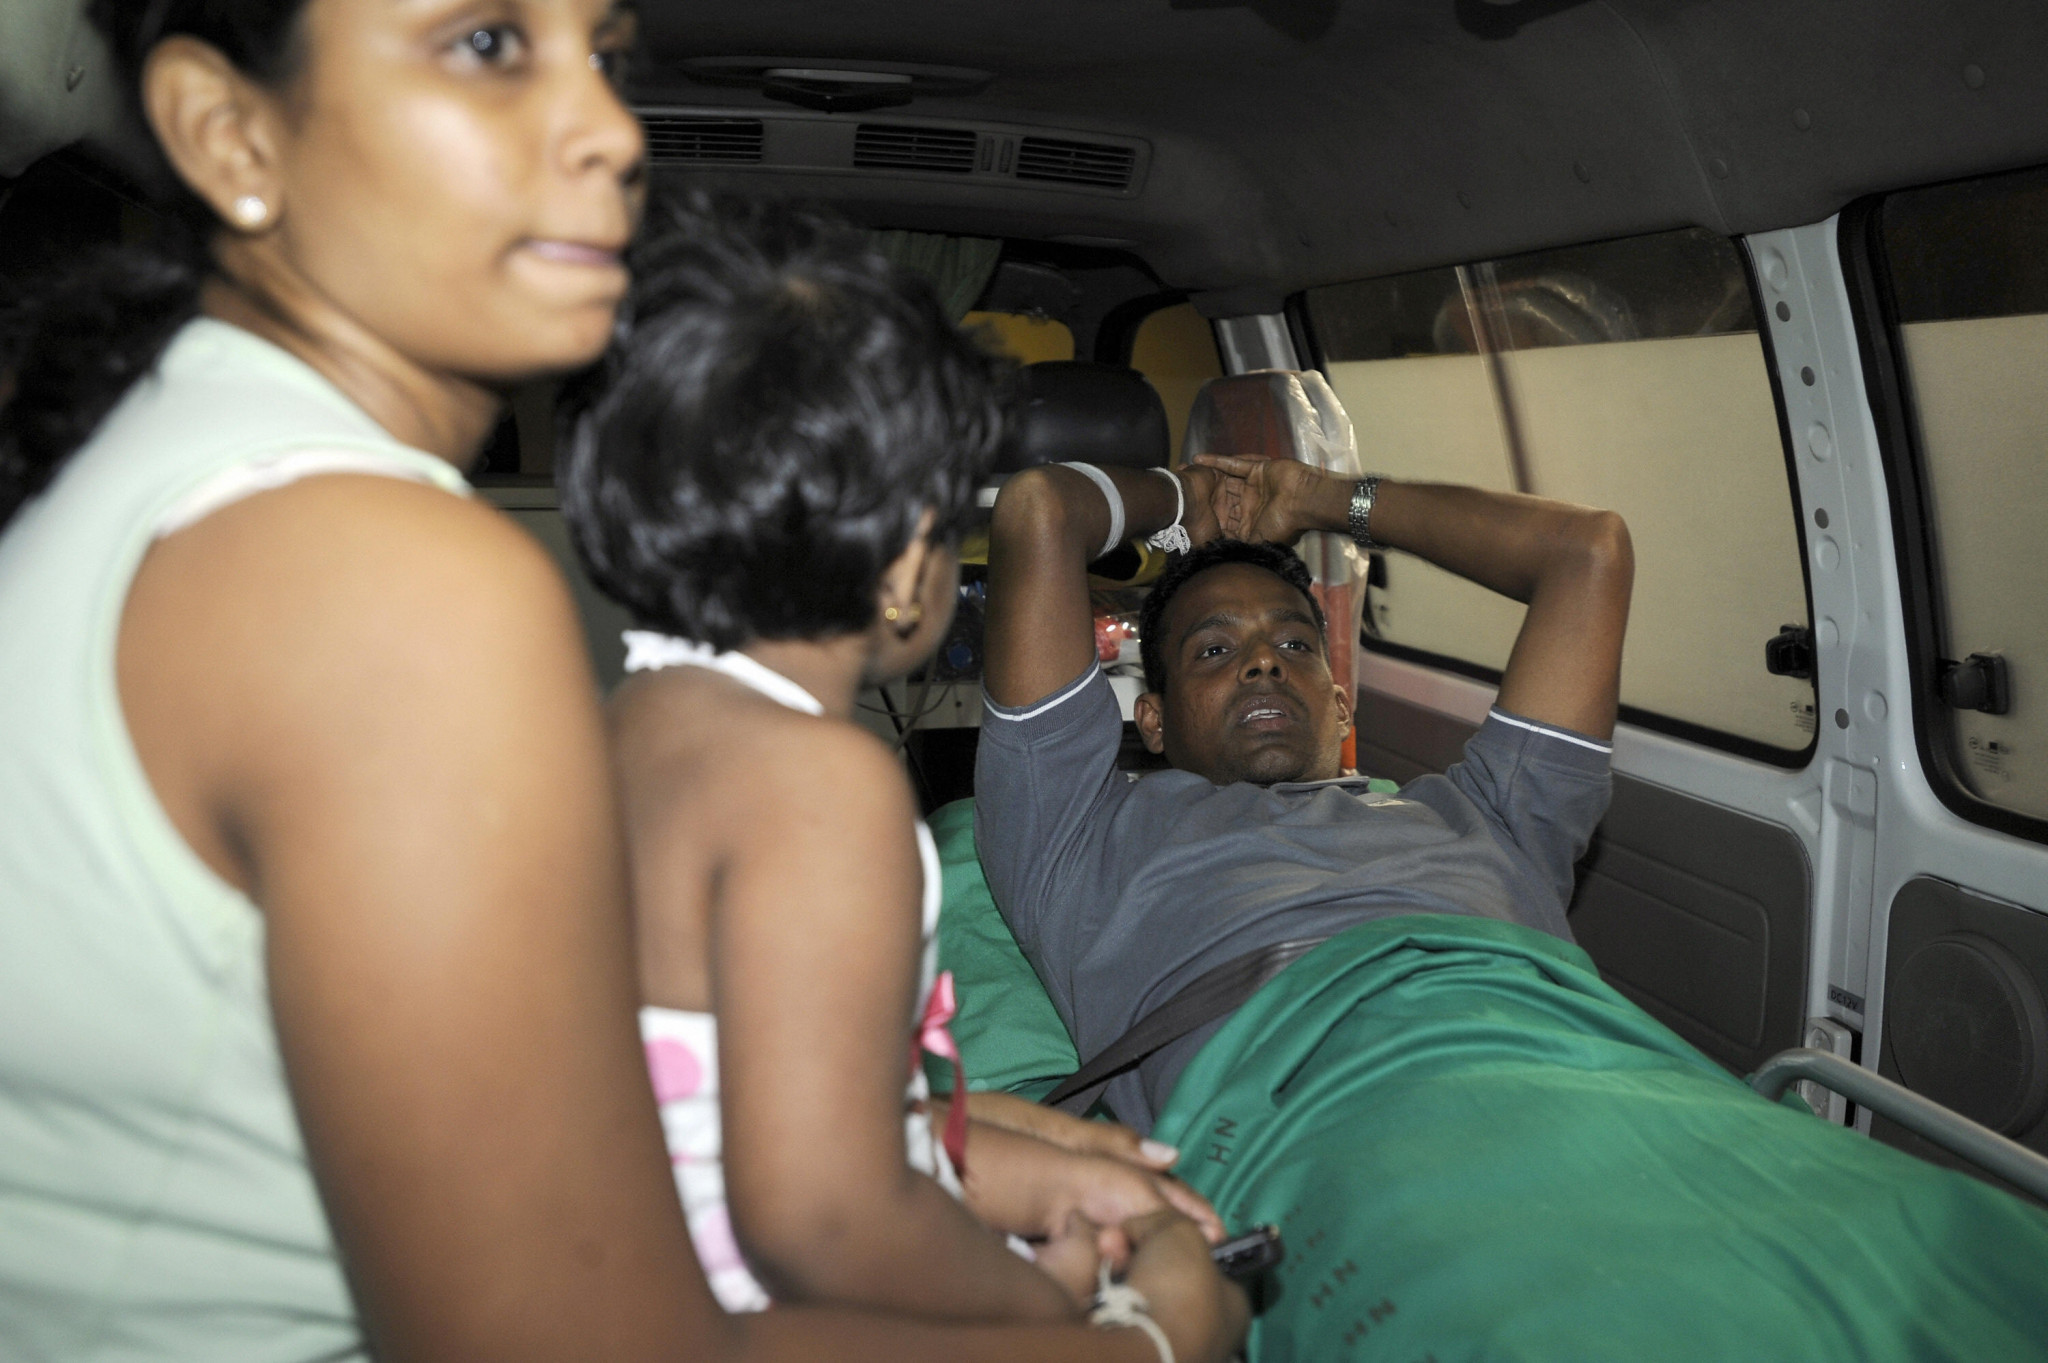 Thilan Samaraweera was among seven Sri Lankan players that were injured after being ambushed by gunmen just before entering a cricket stadium in Lahore in 2009 ©Getty Images